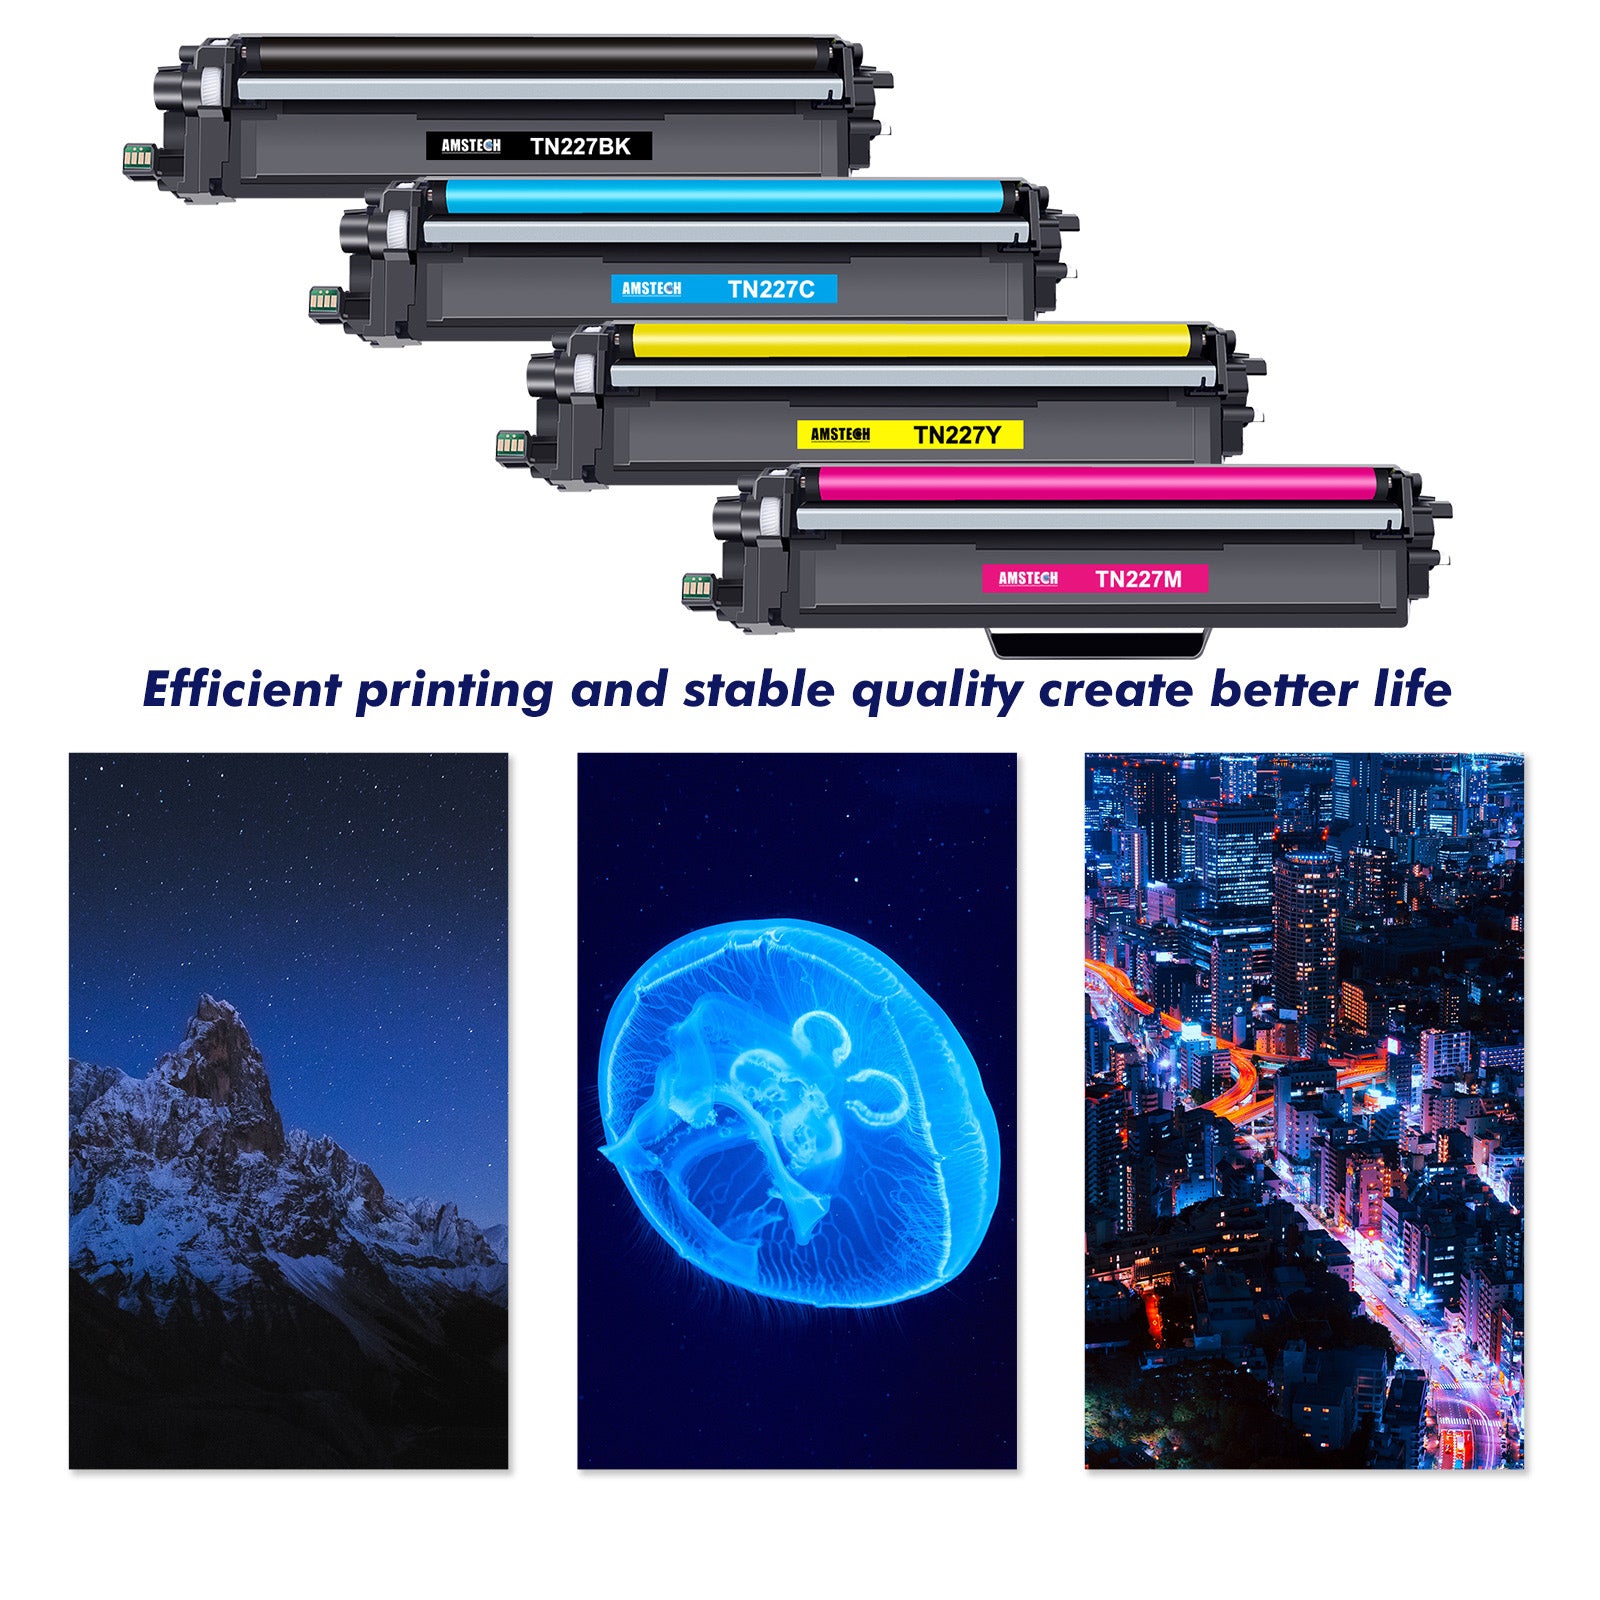 Brother TN-227 Black High Yield Toner Cartridge, Print Up to 3,000 Pages  (TN227BK)